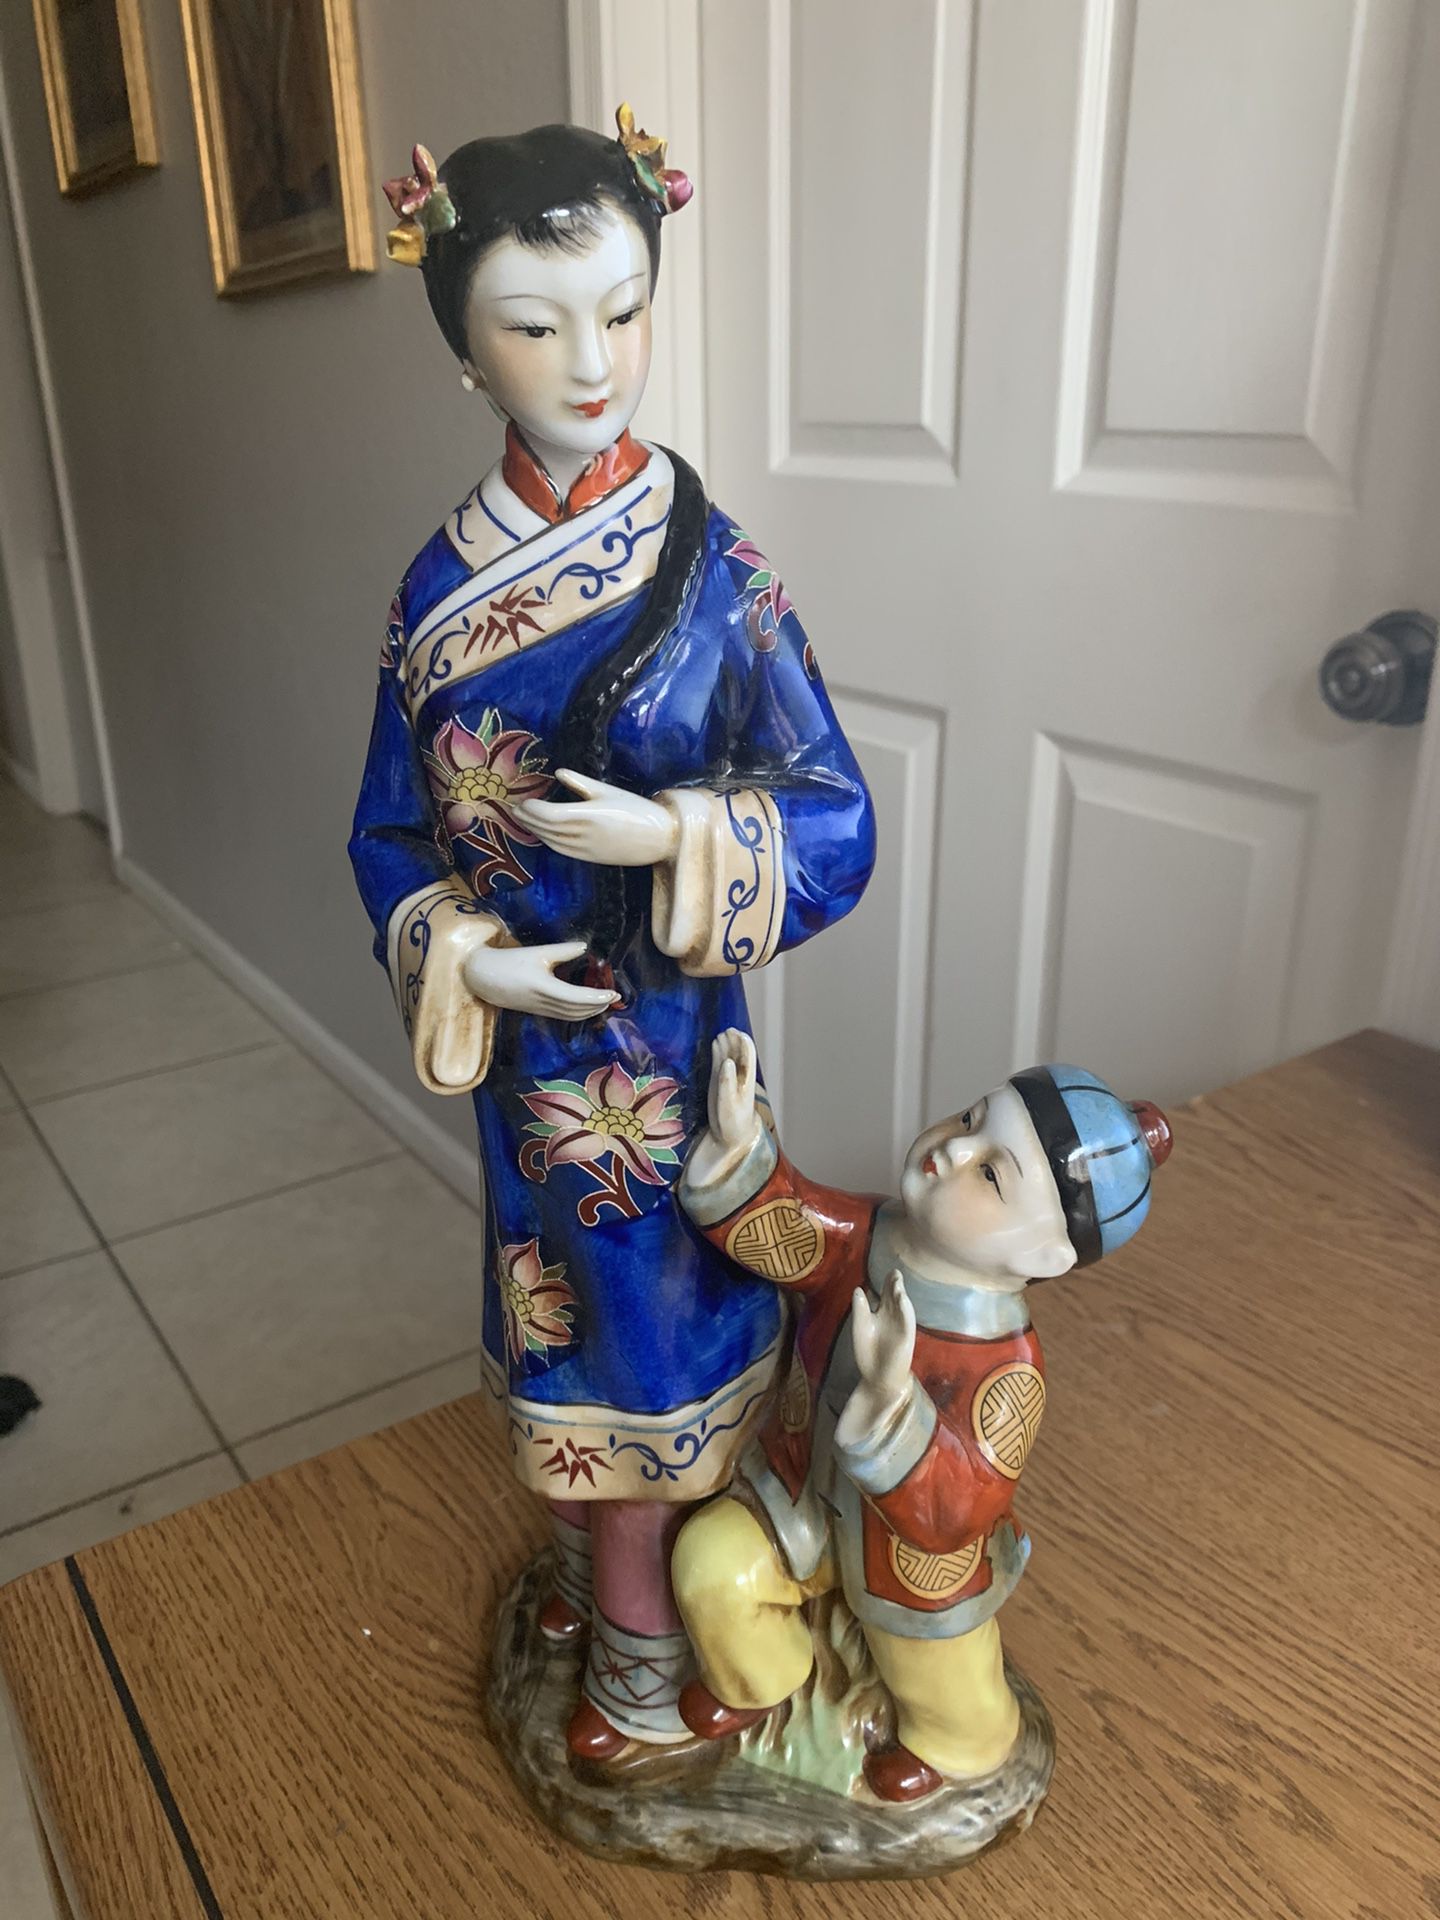 Vintage Lg Chinese 15.5" Chinese Lady Mother & Son Figurine Statue Hand Painted